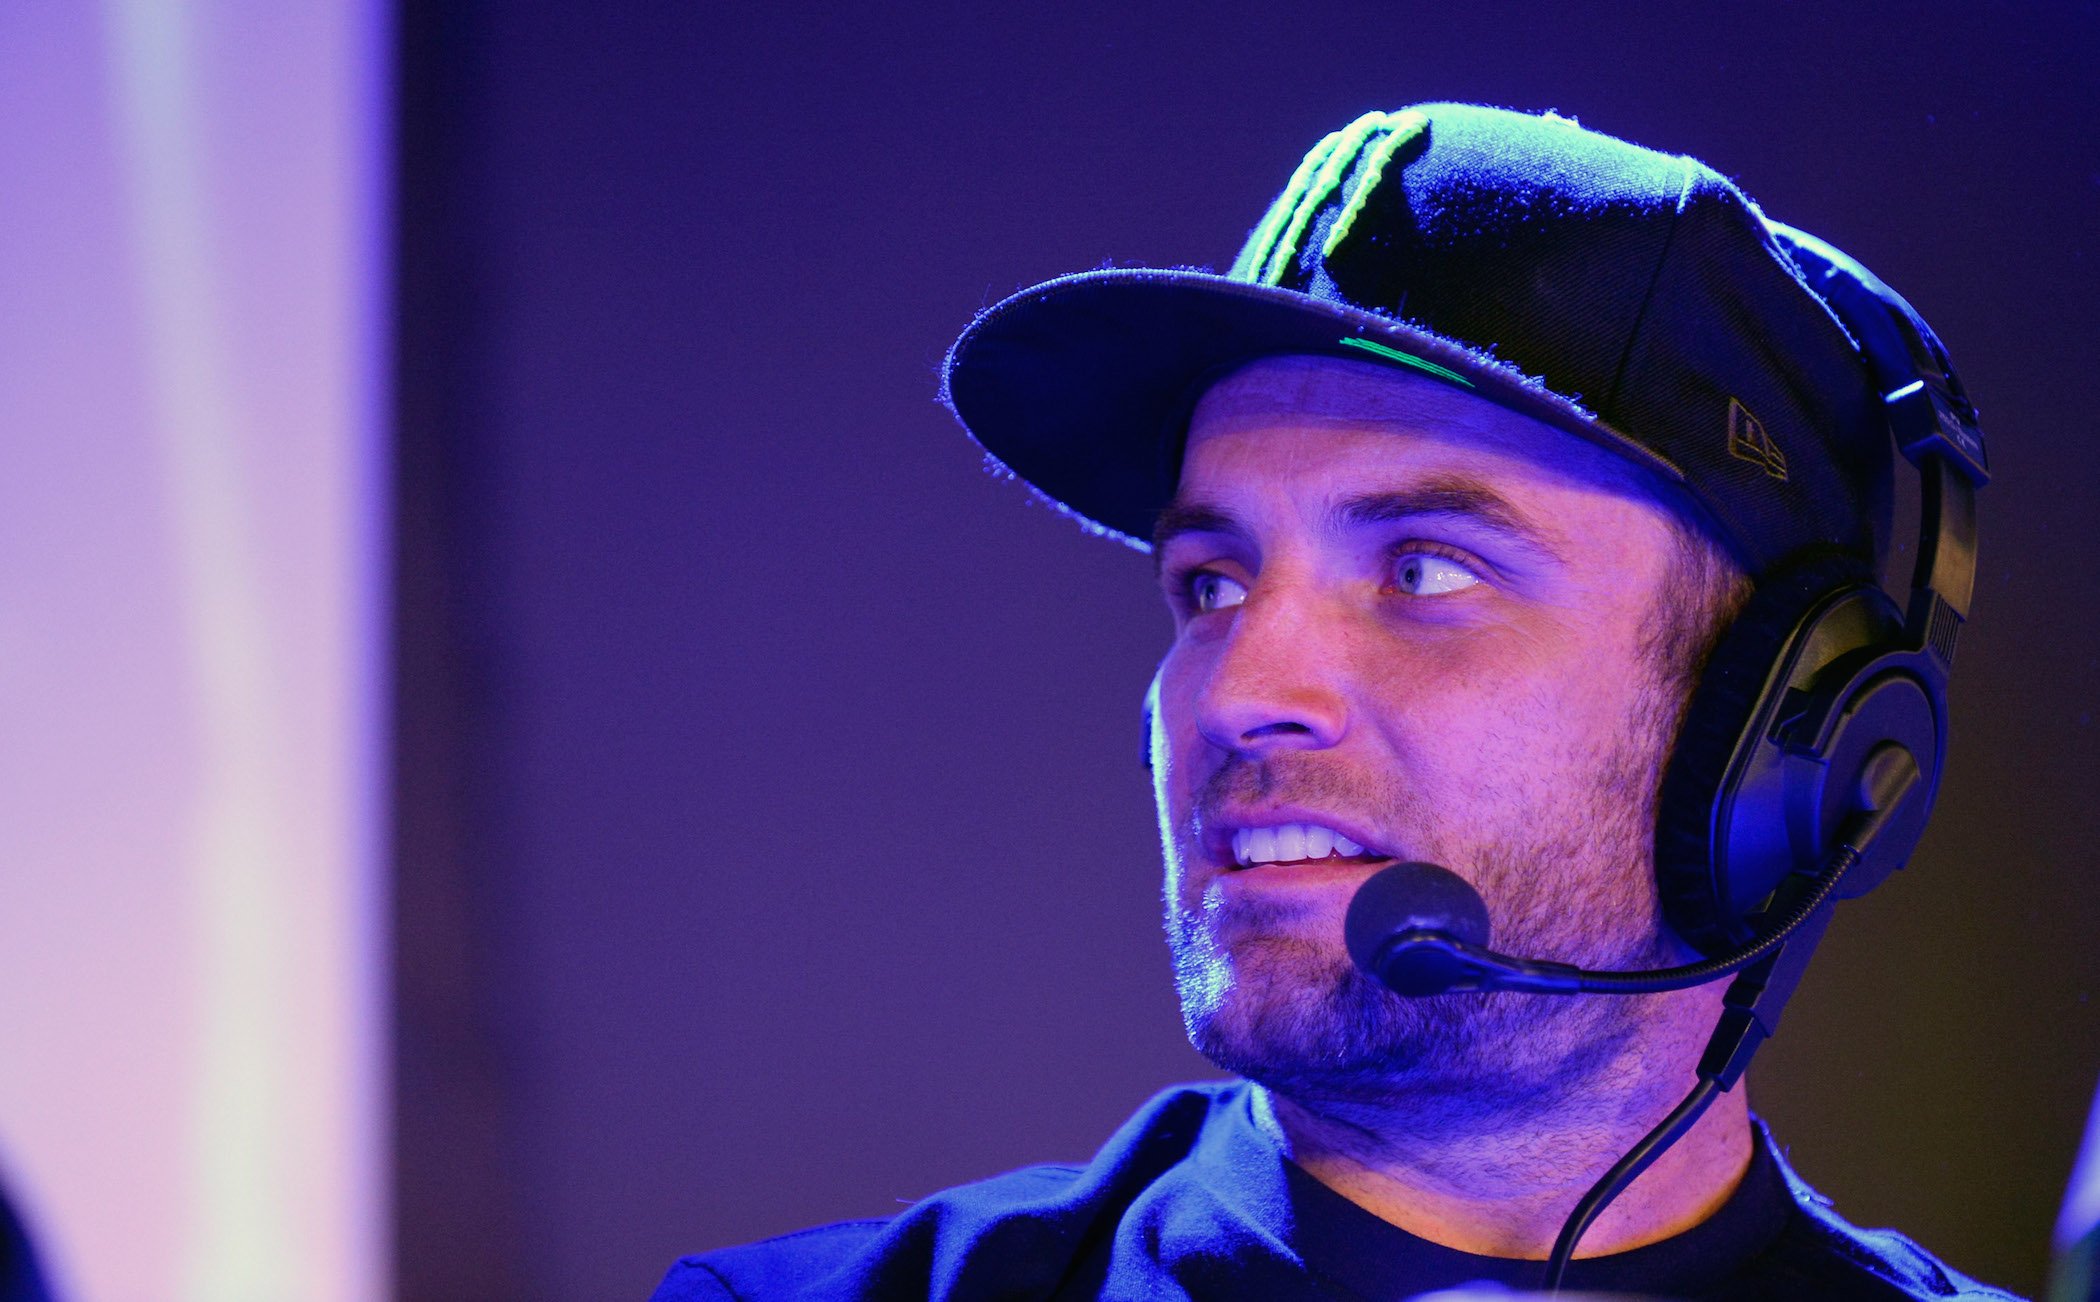 T.J. Lavin, the host of MTV's 'The Challenge,' wearing a headset and looking concerned at an event